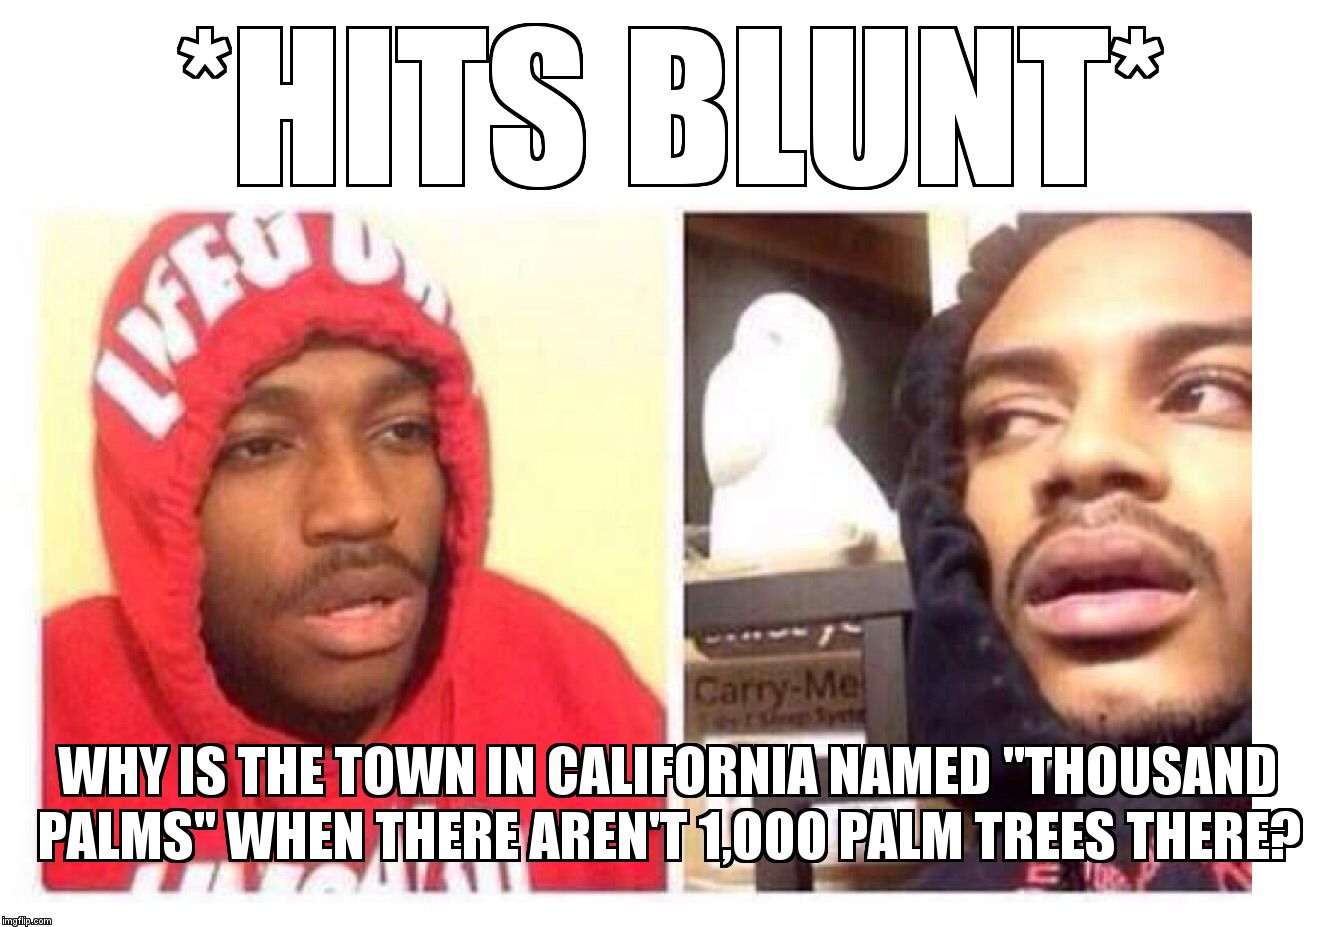 Hits blunt | *HITS BLUNT*; WHY IS THE TOWN IN CALIFORNIA NAMED "THOUSAND PALMS" WHEN THERE AREN'T 1,000 PALM TREES THERE? | image tagged in hits blunt | made w/ Imgflip meme maker